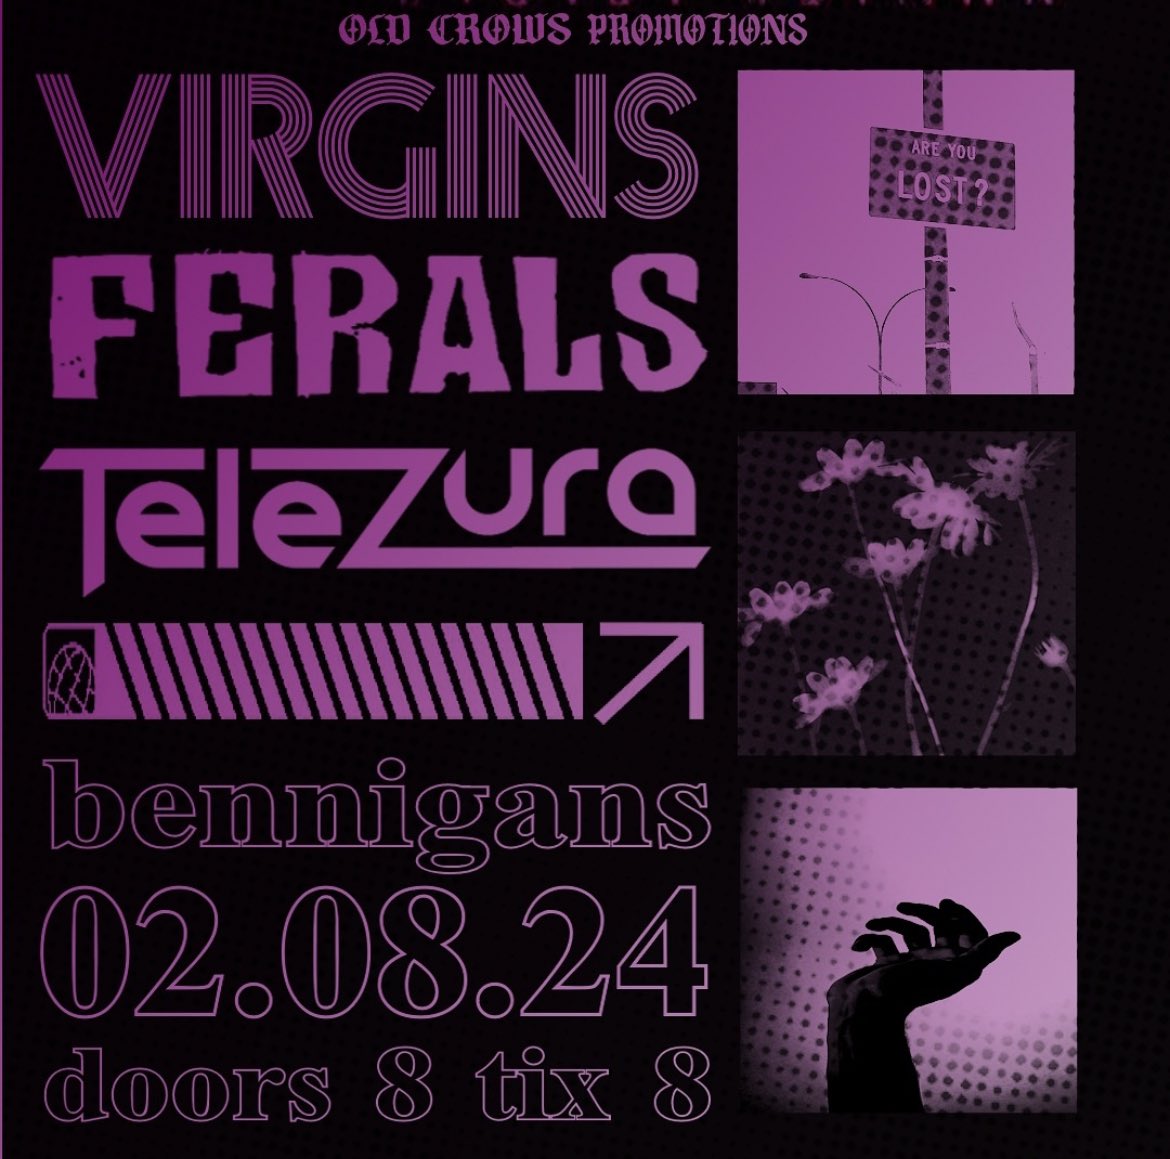 DERRY!! Check out this huge line up! @bandofvirgins @Ferals_Official and @telezura all in @BennigansBar don’t sleep on tickets! eventbrite.com/e/old-crows-pr…